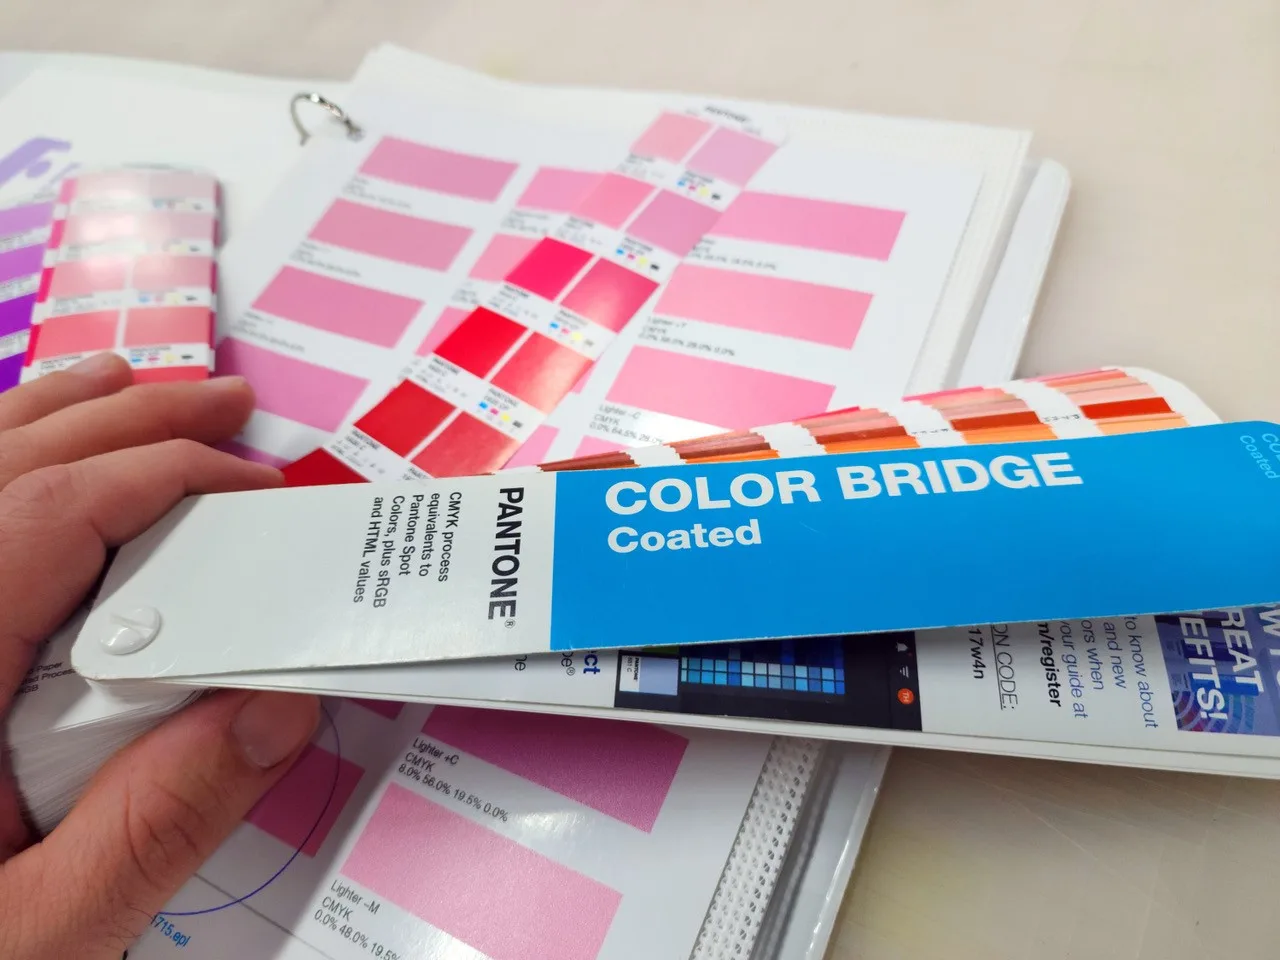 Learn which Pantone Color Book to get for your specific project